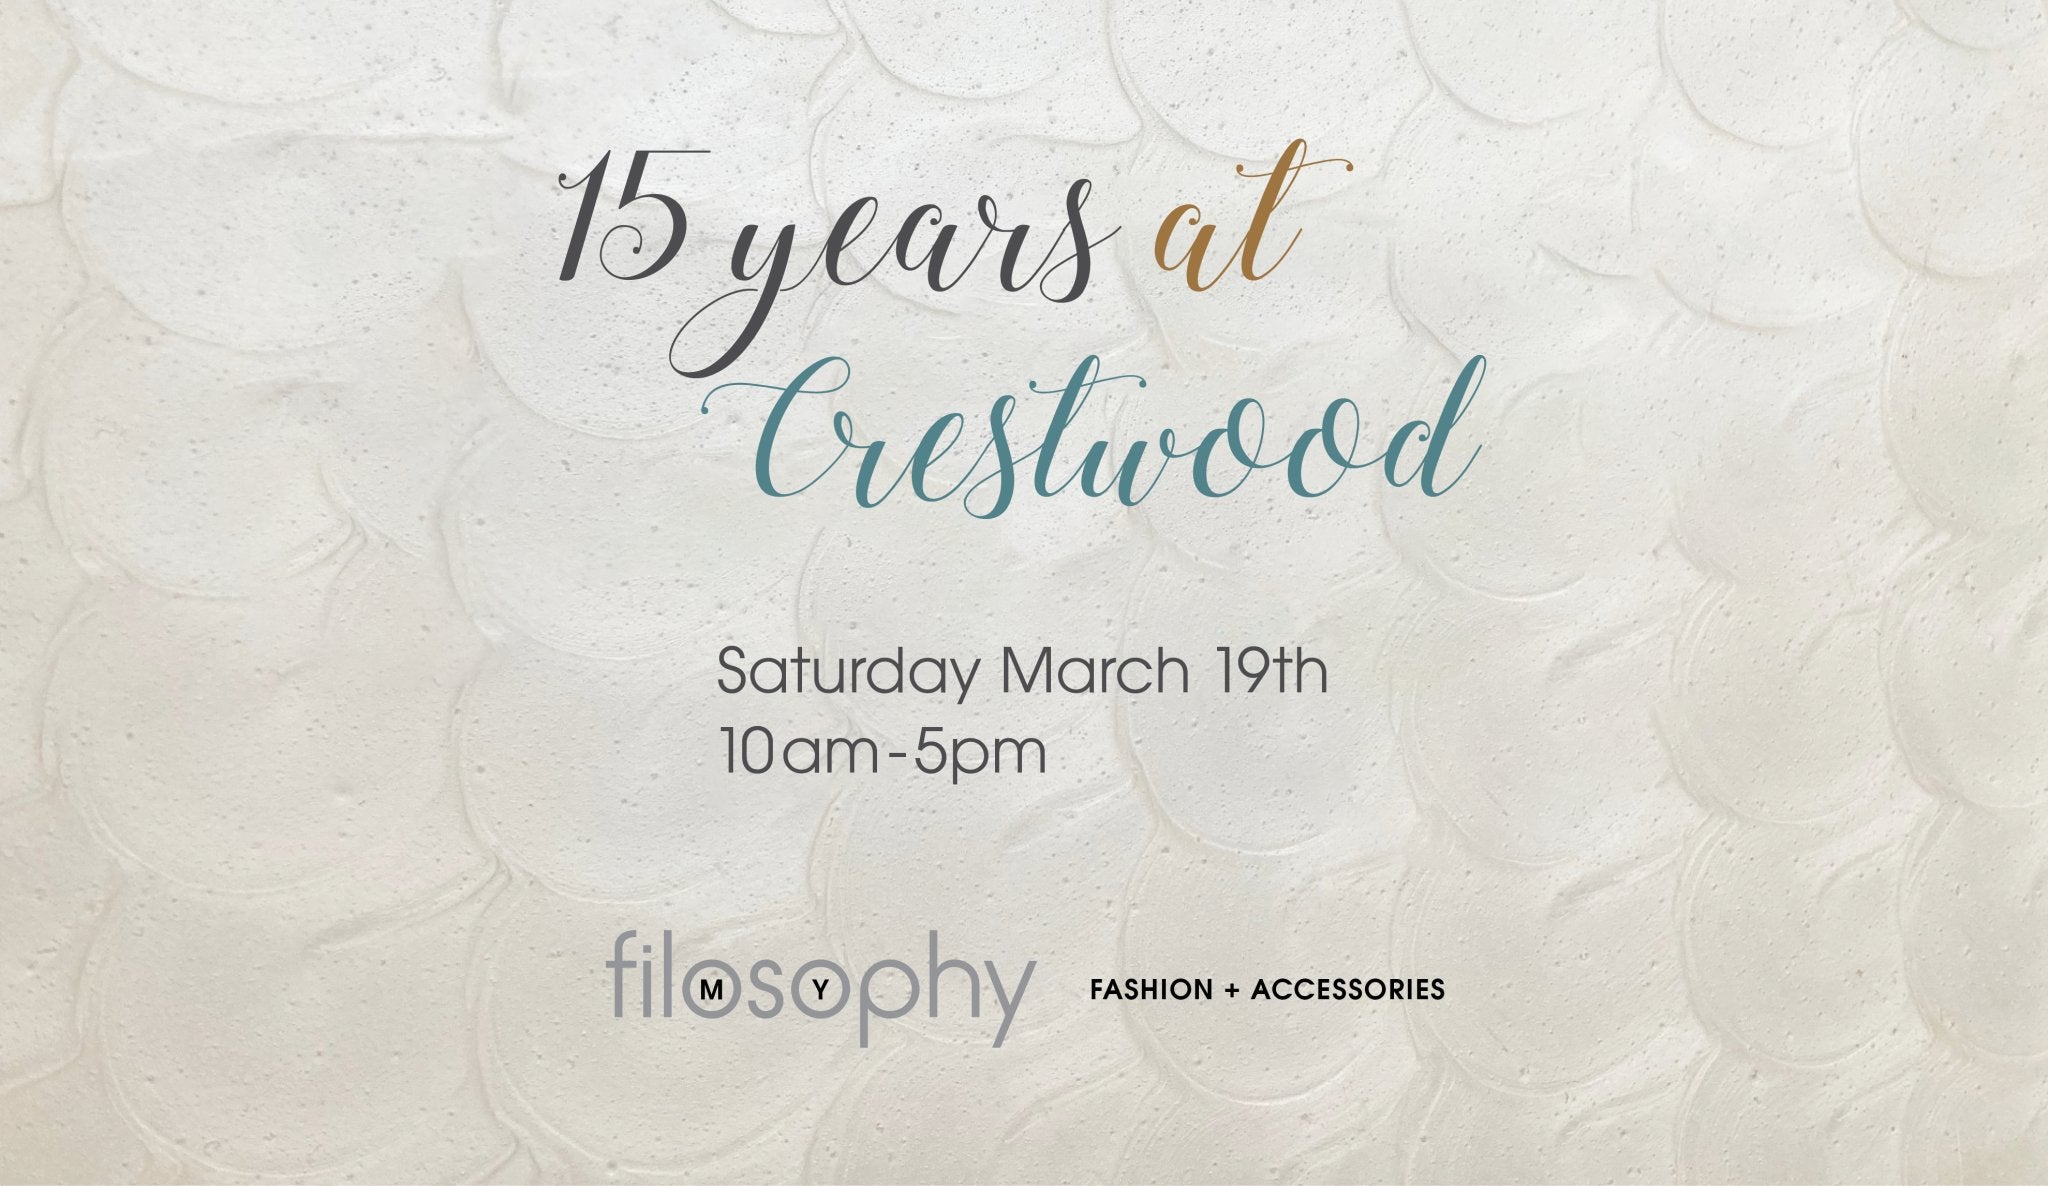 15 Years at Crestwood - My Filosophy